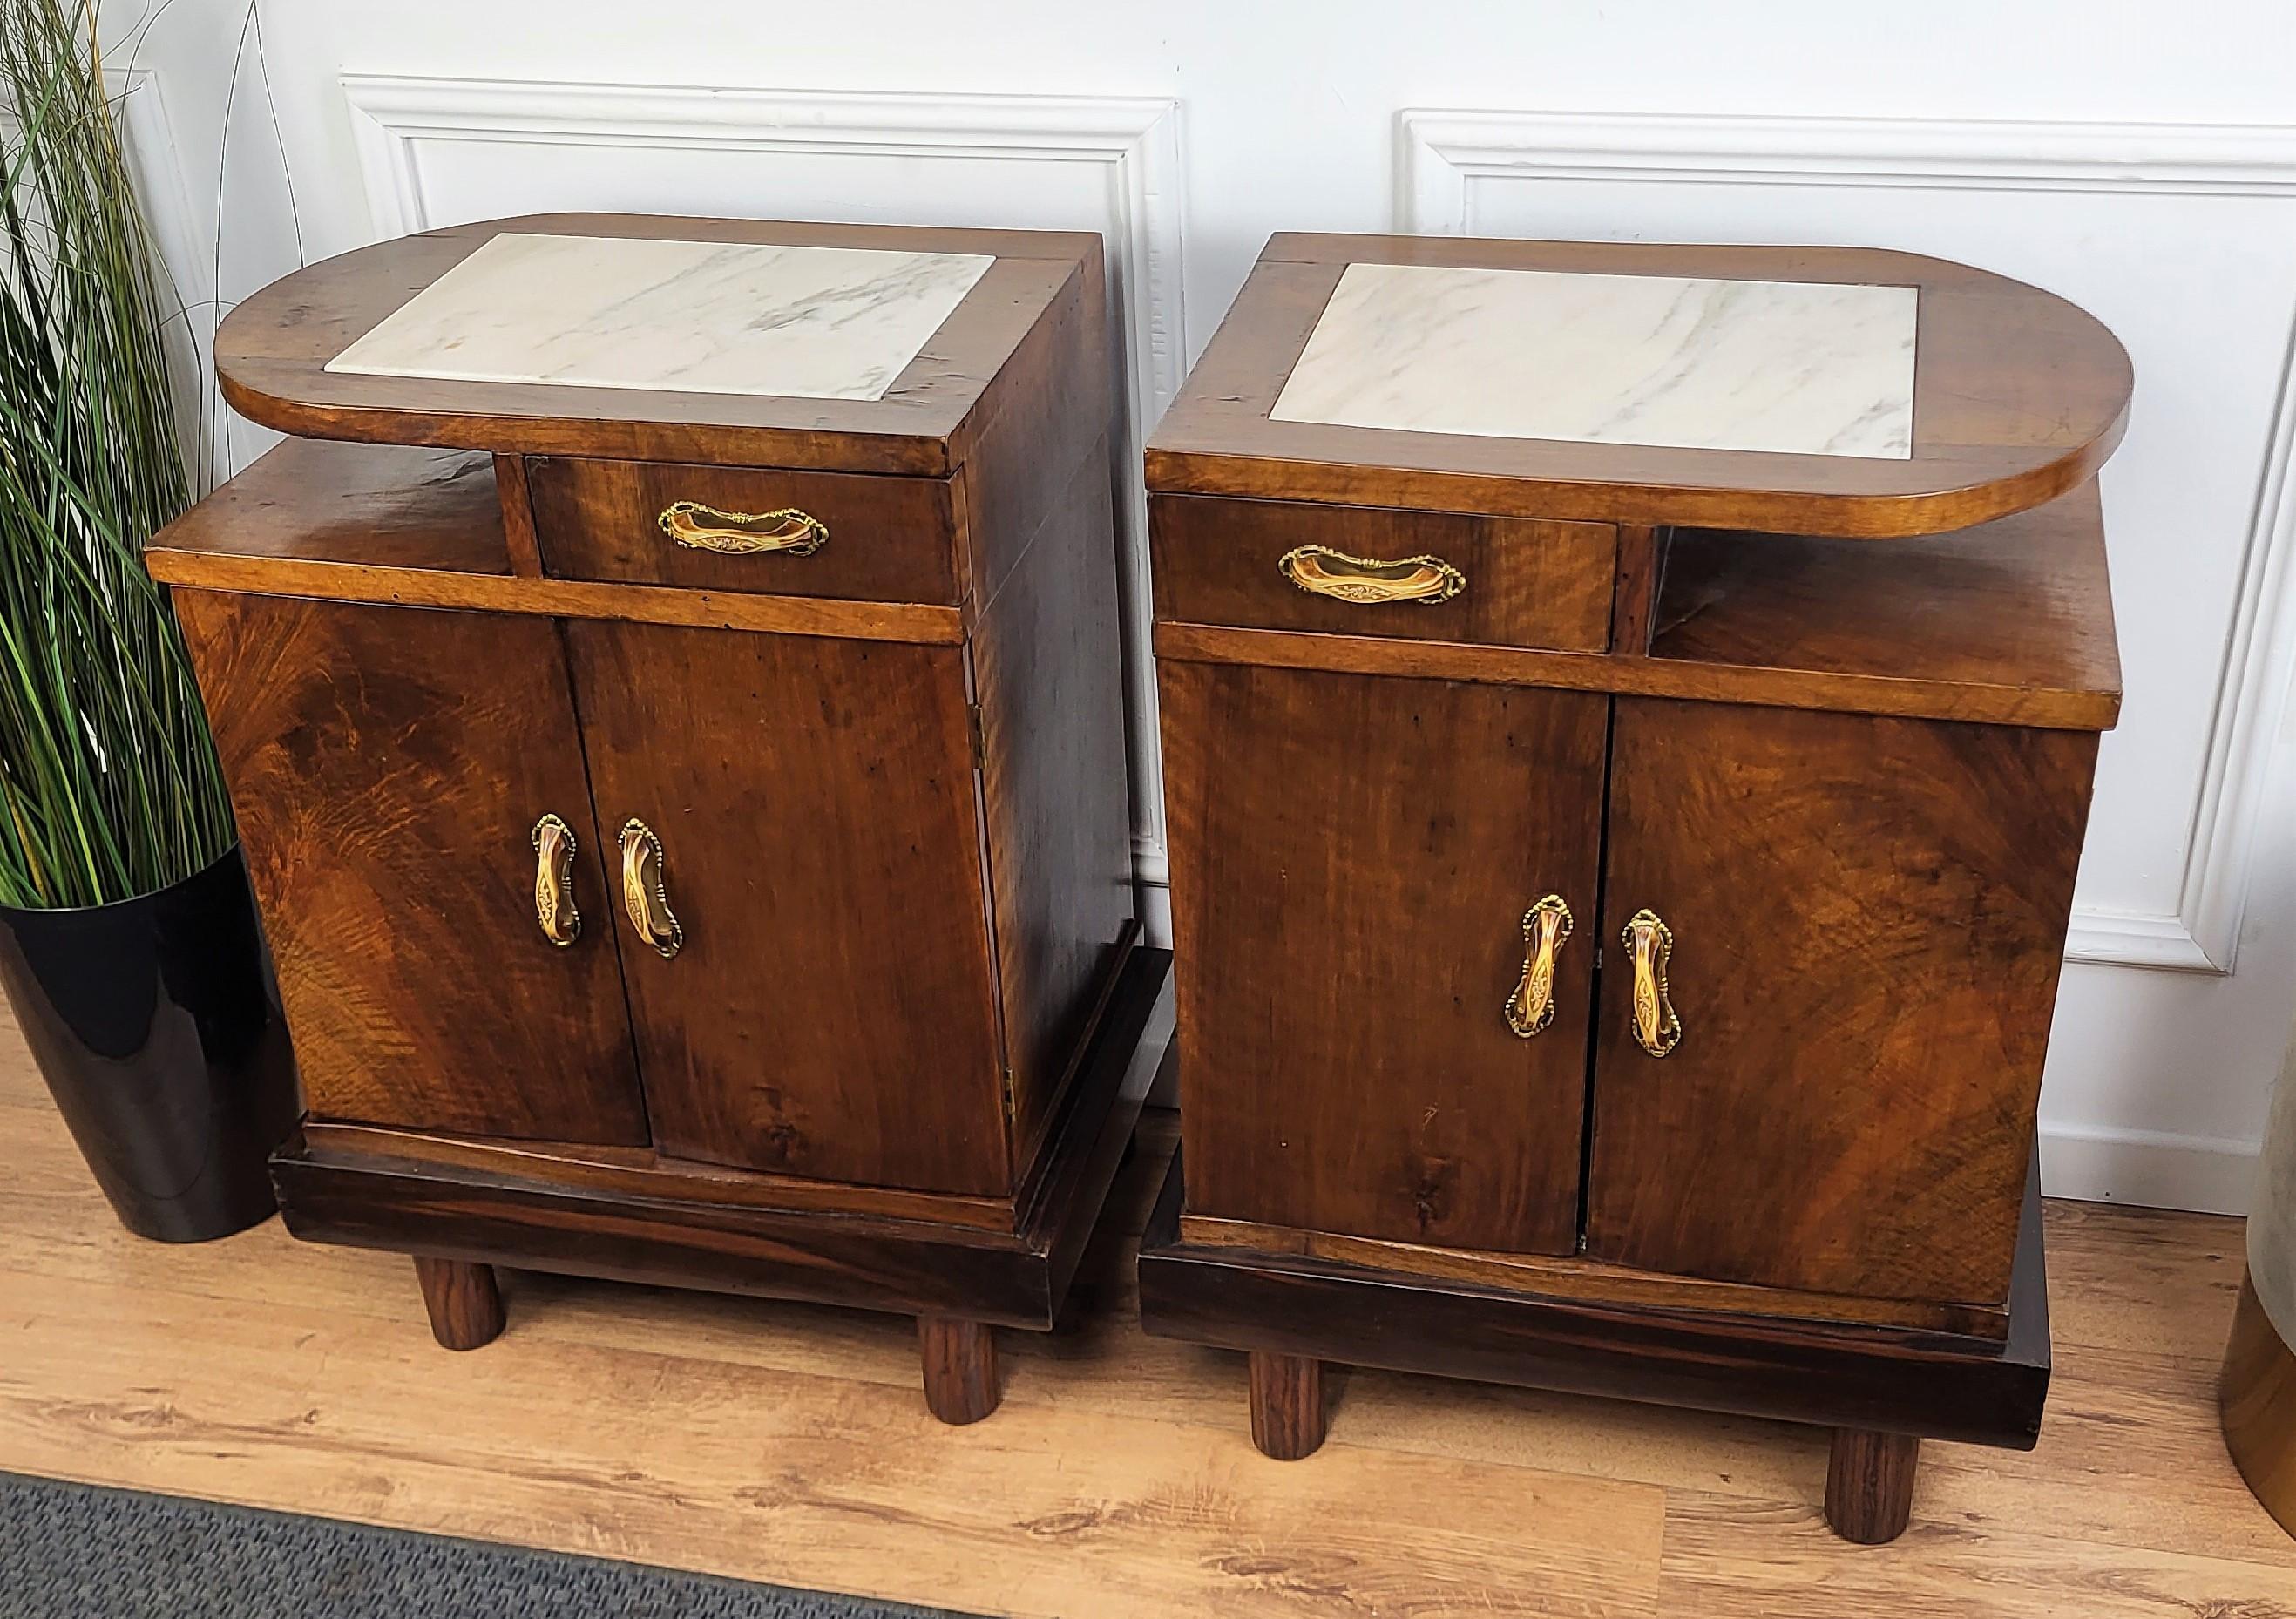 Very elegant and refined pair of Italian 1940s Art Deco bedside tables with great design shape and decors in veneer burl walnut briar wood and beautiful marble top, two front doors and a drawer and shelf. This nightstand makes a great look in any